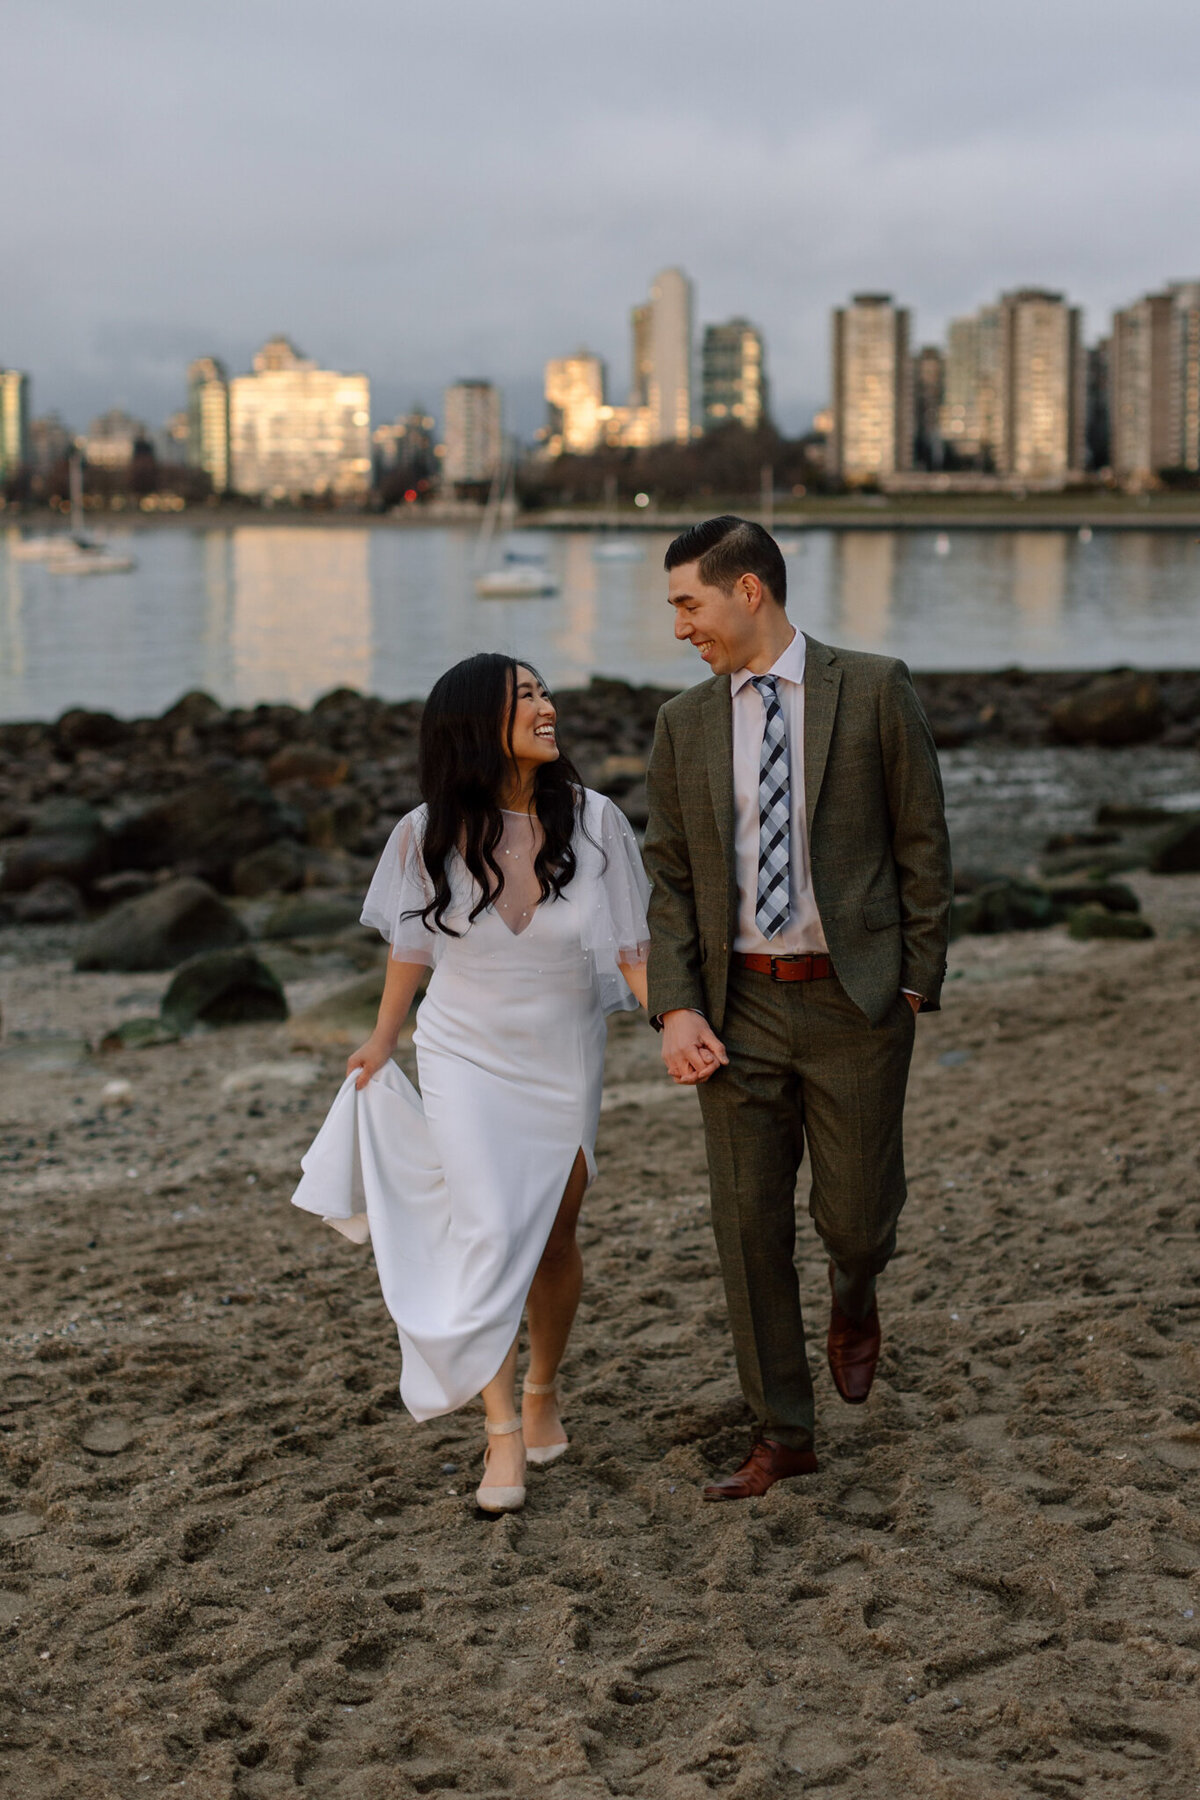 Stunning bride and groom on beach, capture by Bronte Taylor Photography, is a Vancouver based photographer with a playful, genuine and intimate approach.